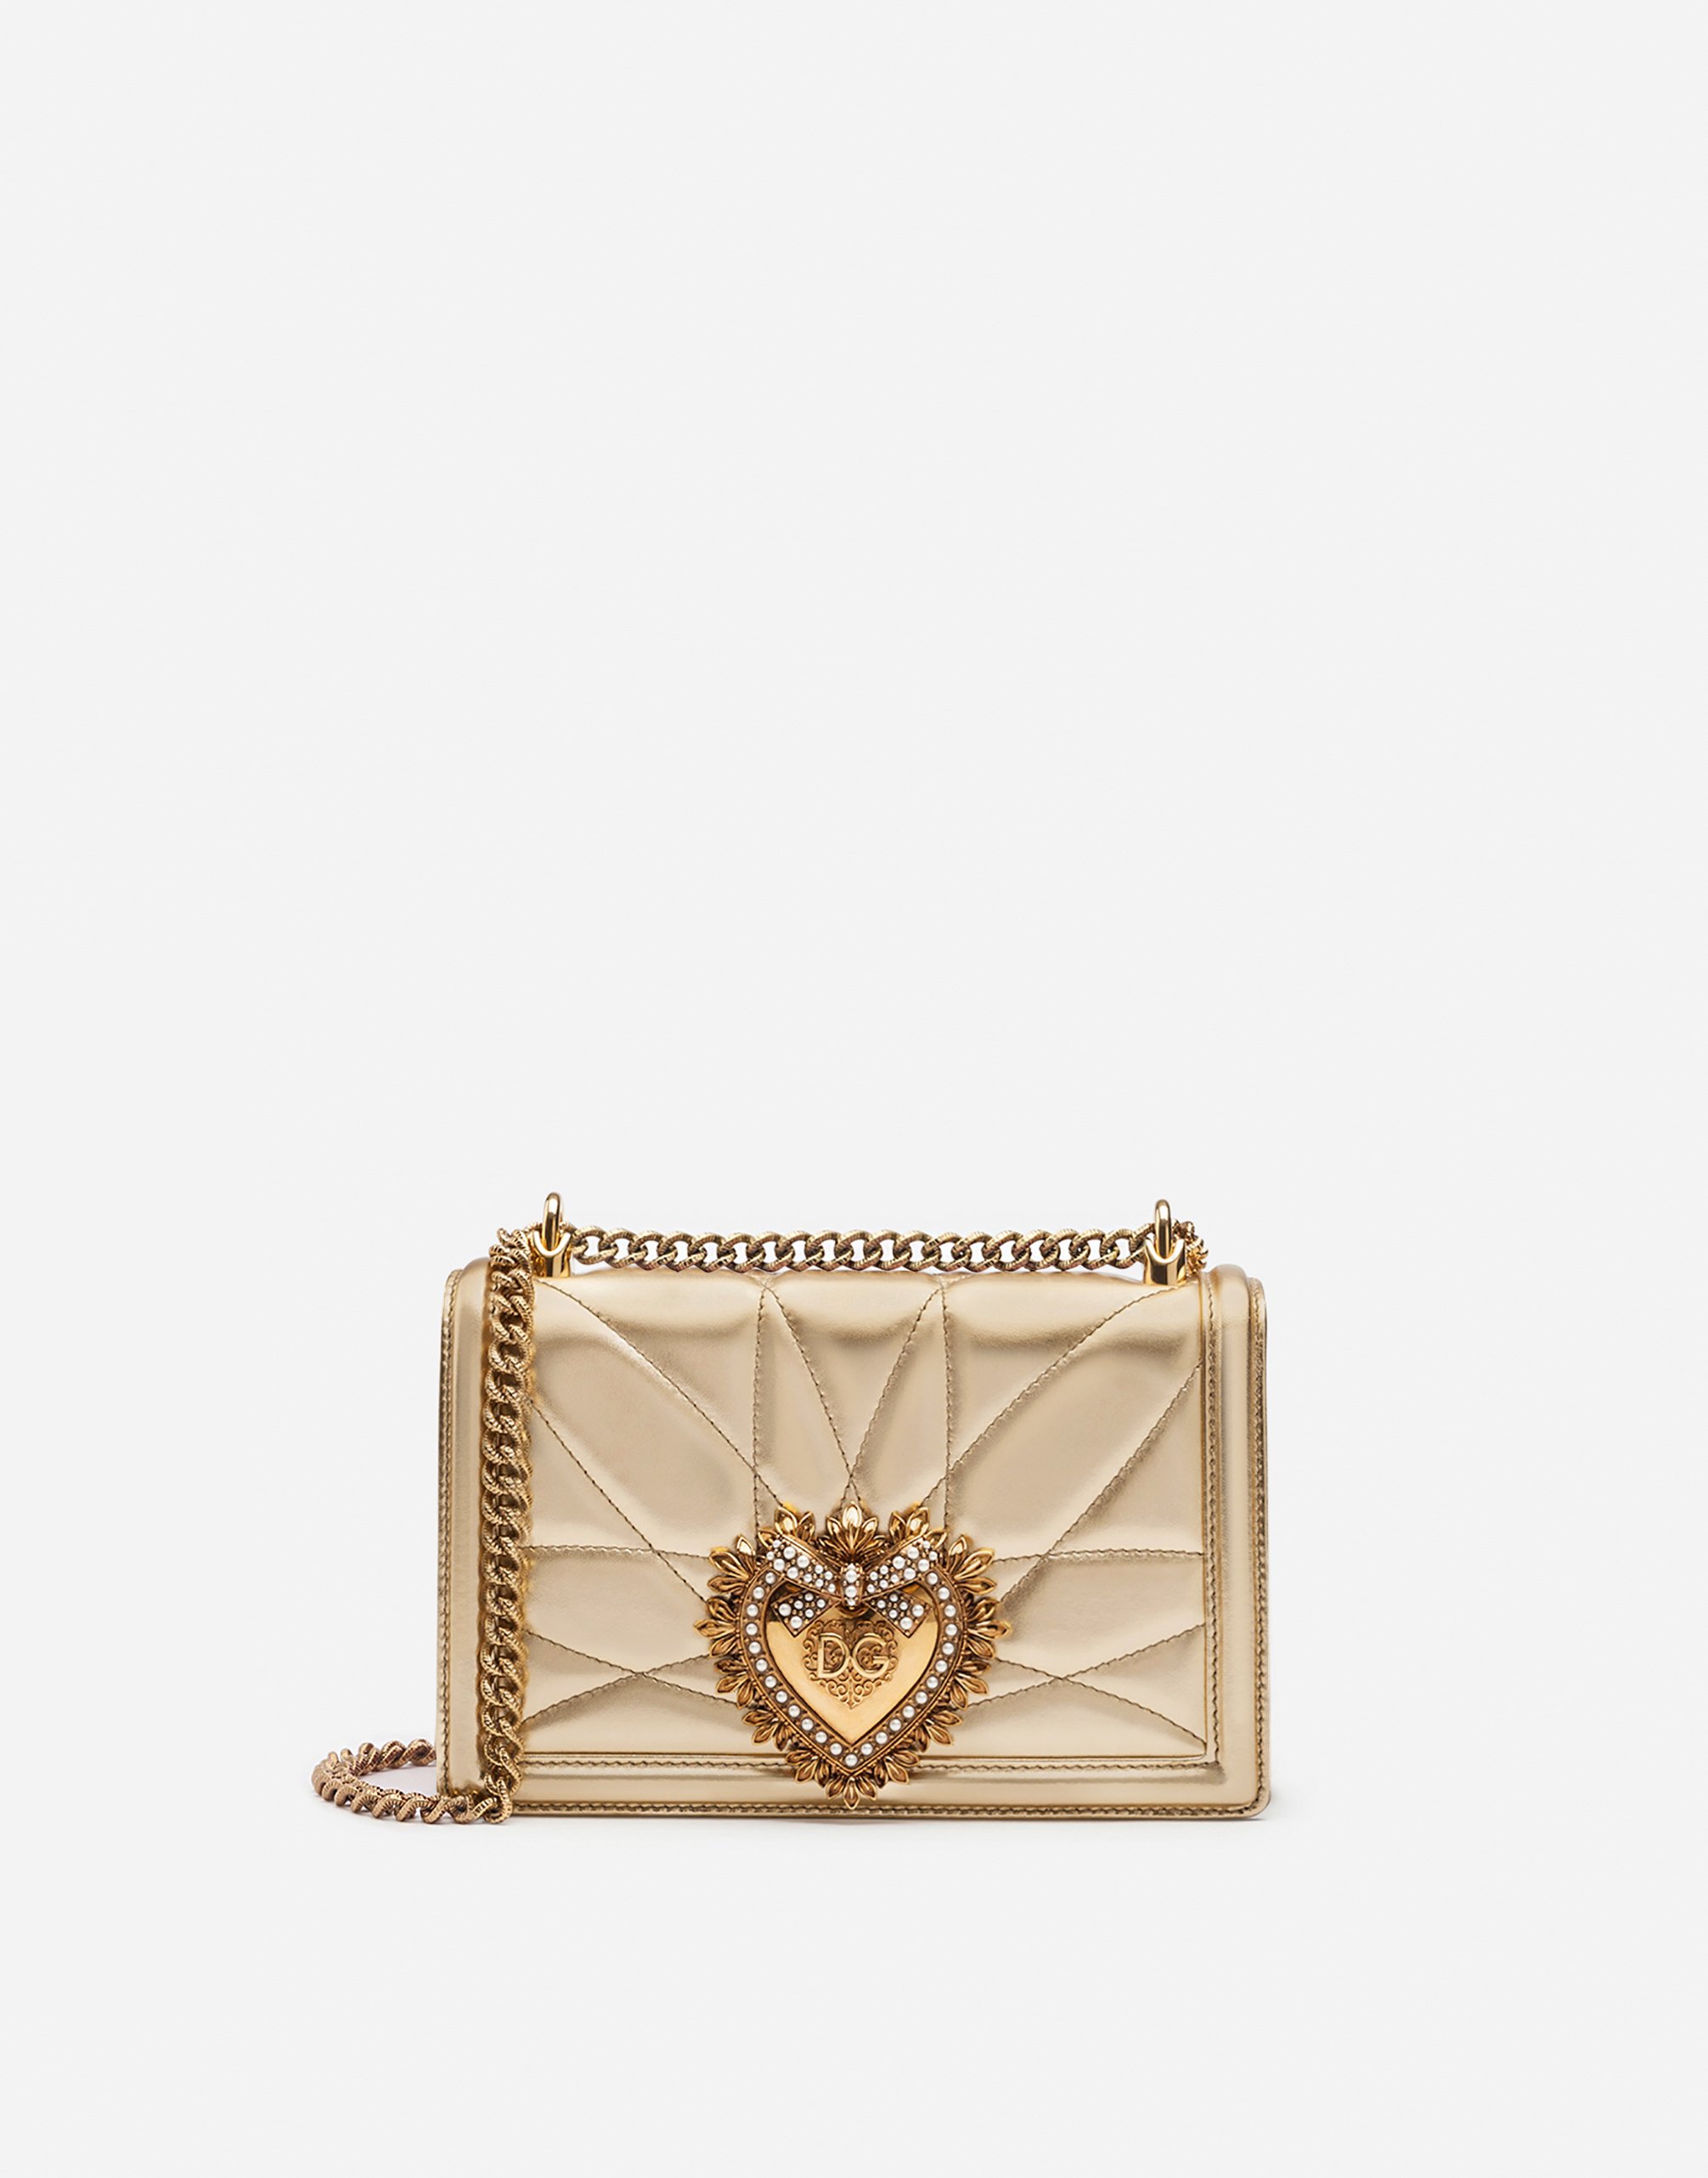 Medium Devotion crossbody bag in quilted nappa mordore leather in Gold